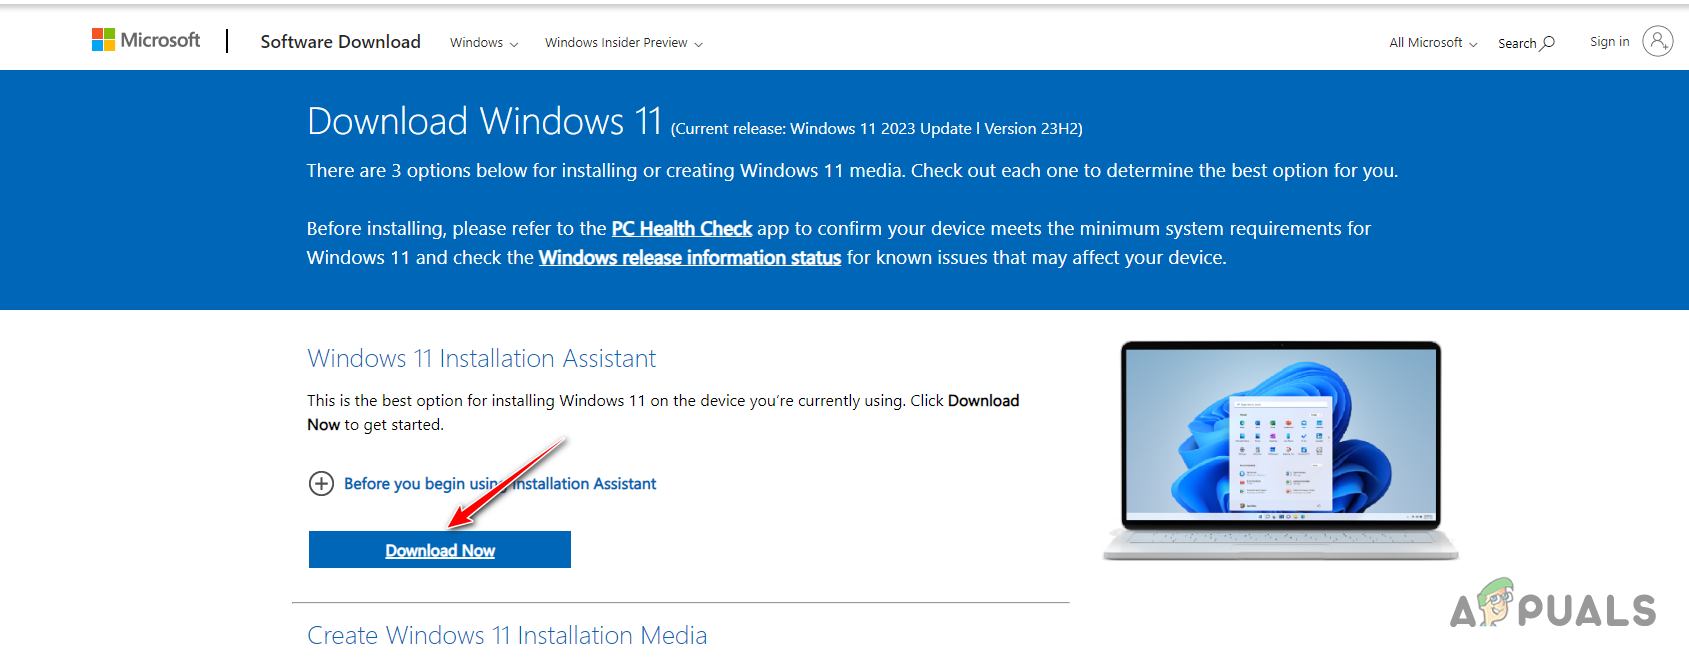 Downloading Windows 11 Installation Assistant